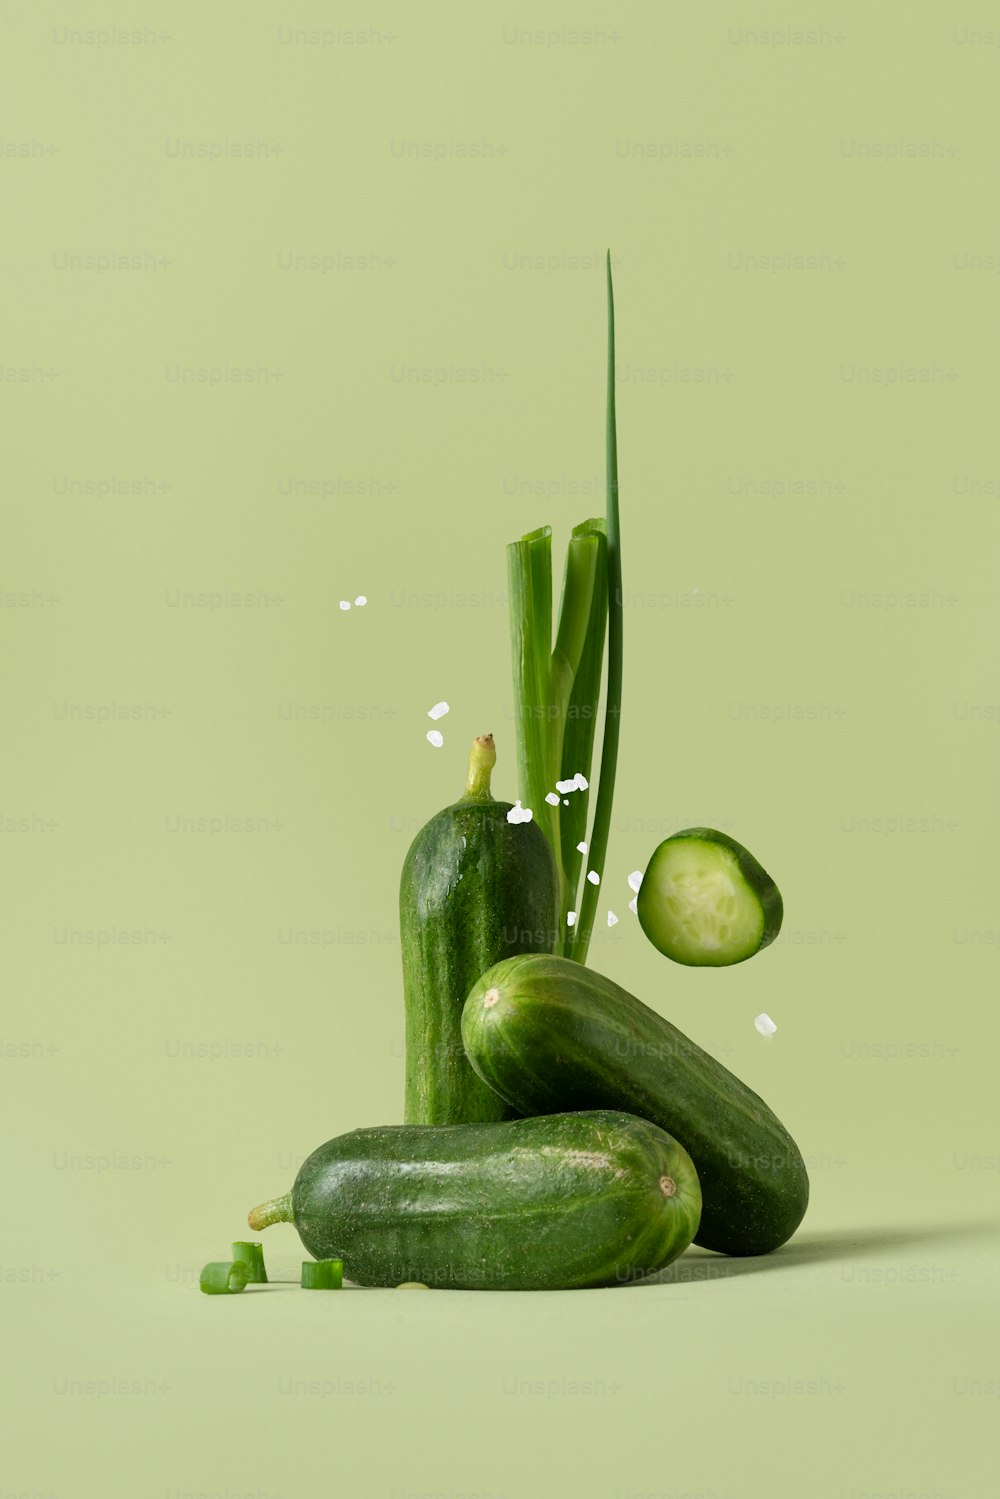 a cucumber and a cucumber on a green background